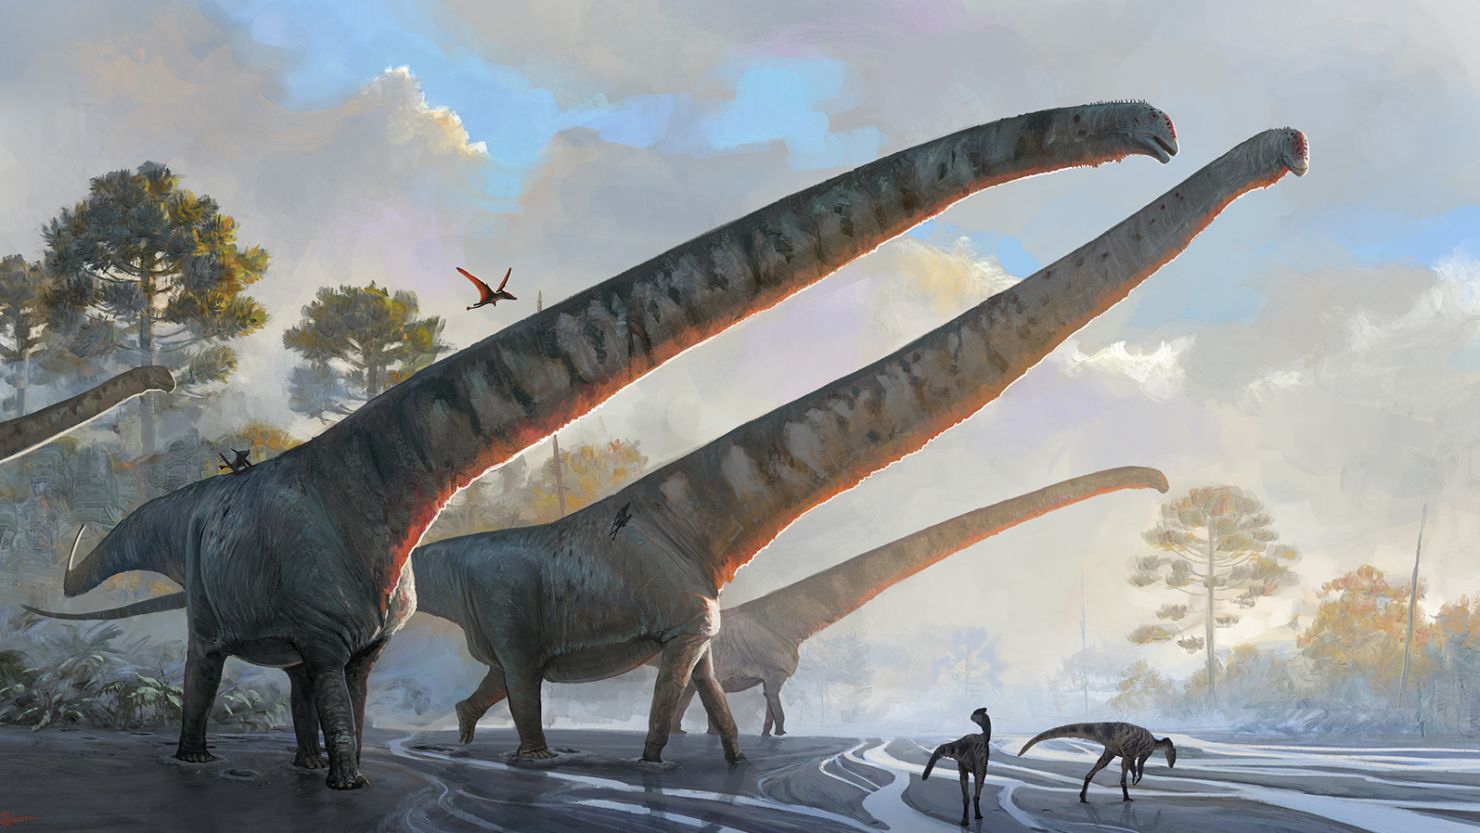 Researchers Identify Dinosaur Species 5 Times Larger Than